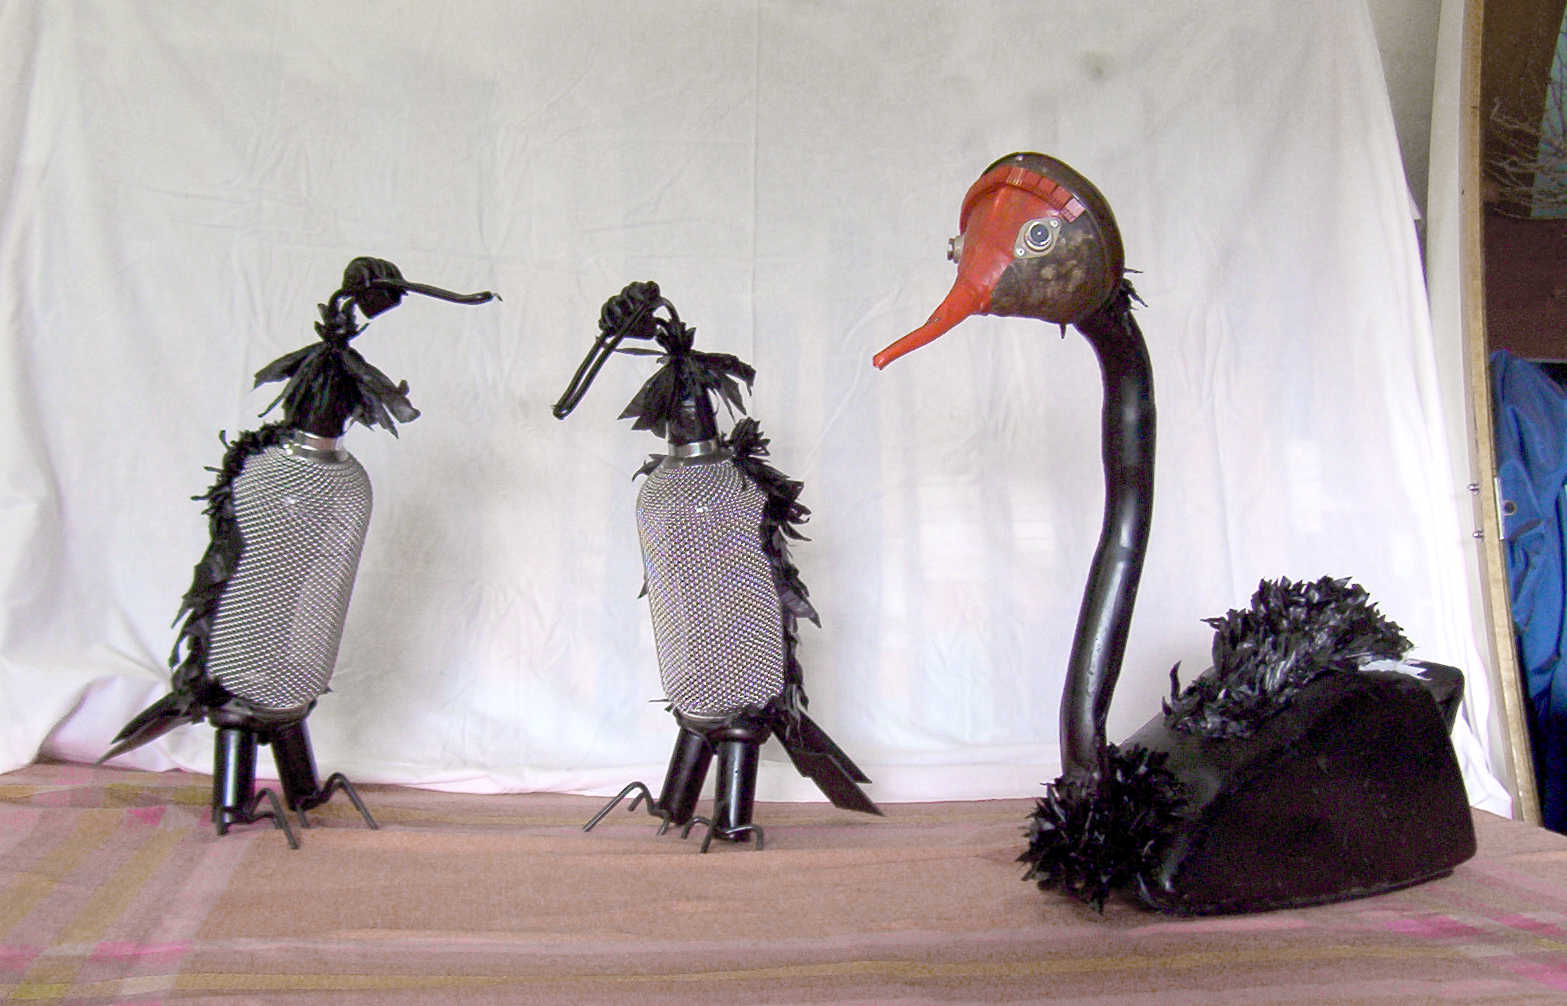 Black swan and two shags from 'Waterbirds' by Libby Bloxham. These sculptures are assembled from found and recycled objects including fuel tanks, spray bottles and plastic bags, drawing attention to the troubled relationship of human behaviour with our surrounding wildlife.